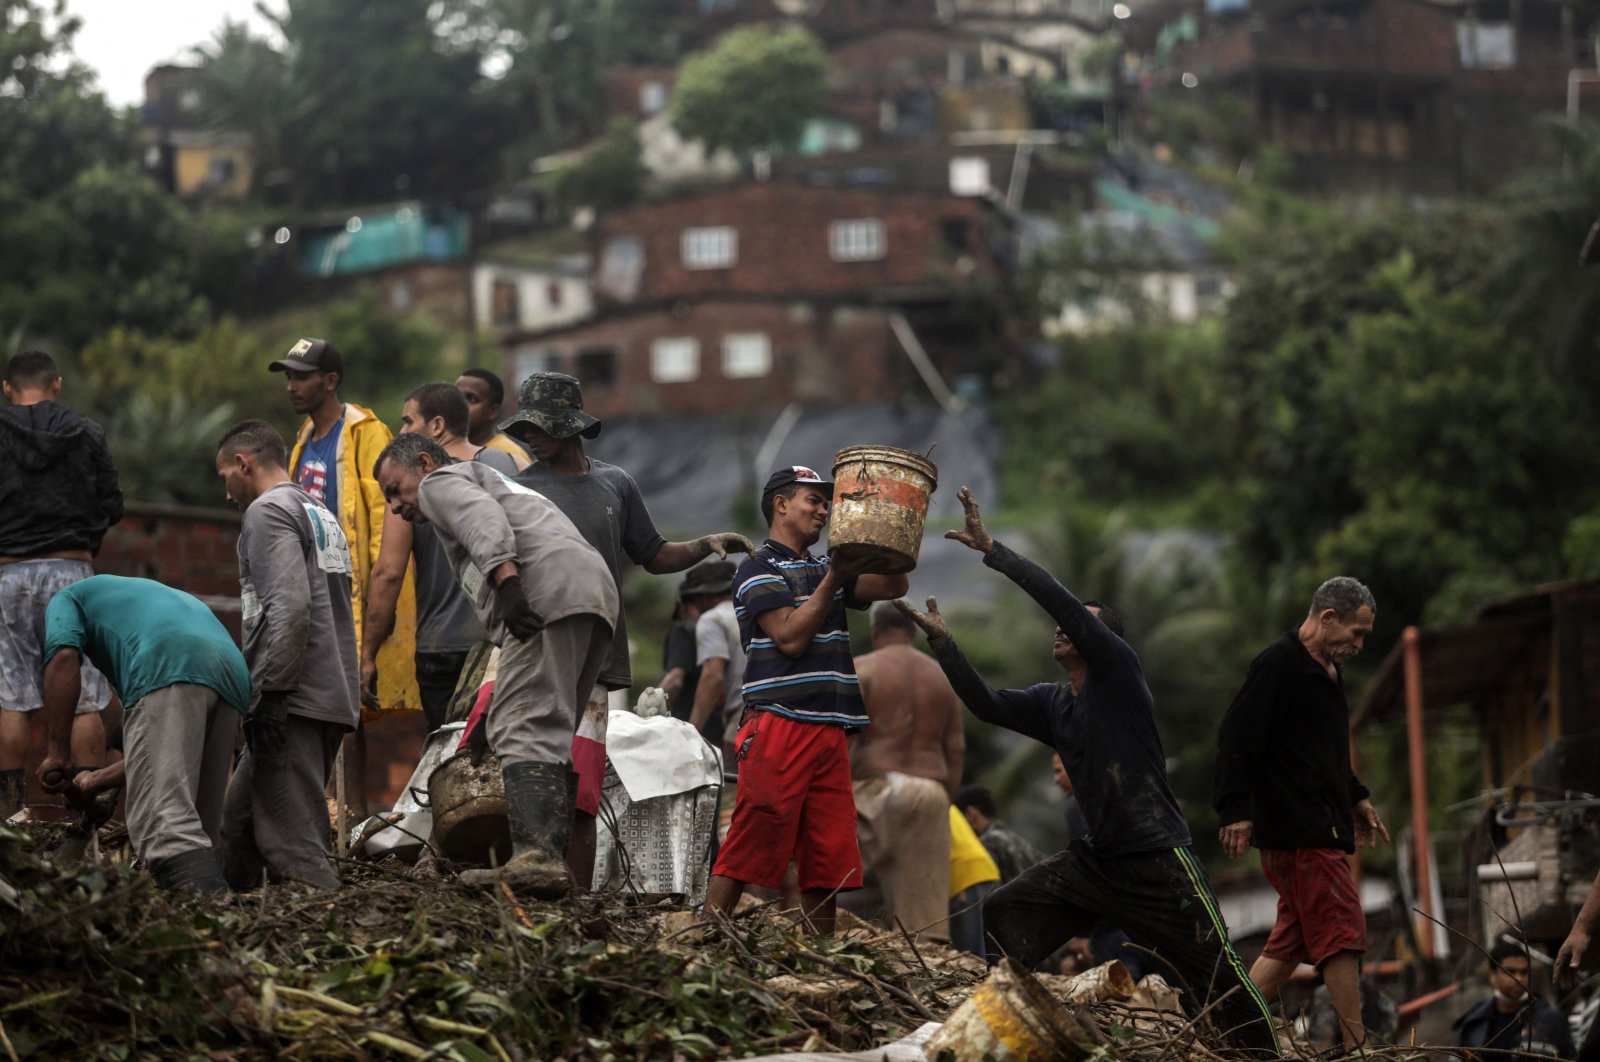 Residents and rescue workers remove debris during a rescue mission amid the debris left by a landslide in the community Jardim Monte Verde, Ibura neighborhood, in Recife, Pernambuco state, Brazil, May 28, 2022. (AFP Photo/Racife City Hall/Diego Nigro)